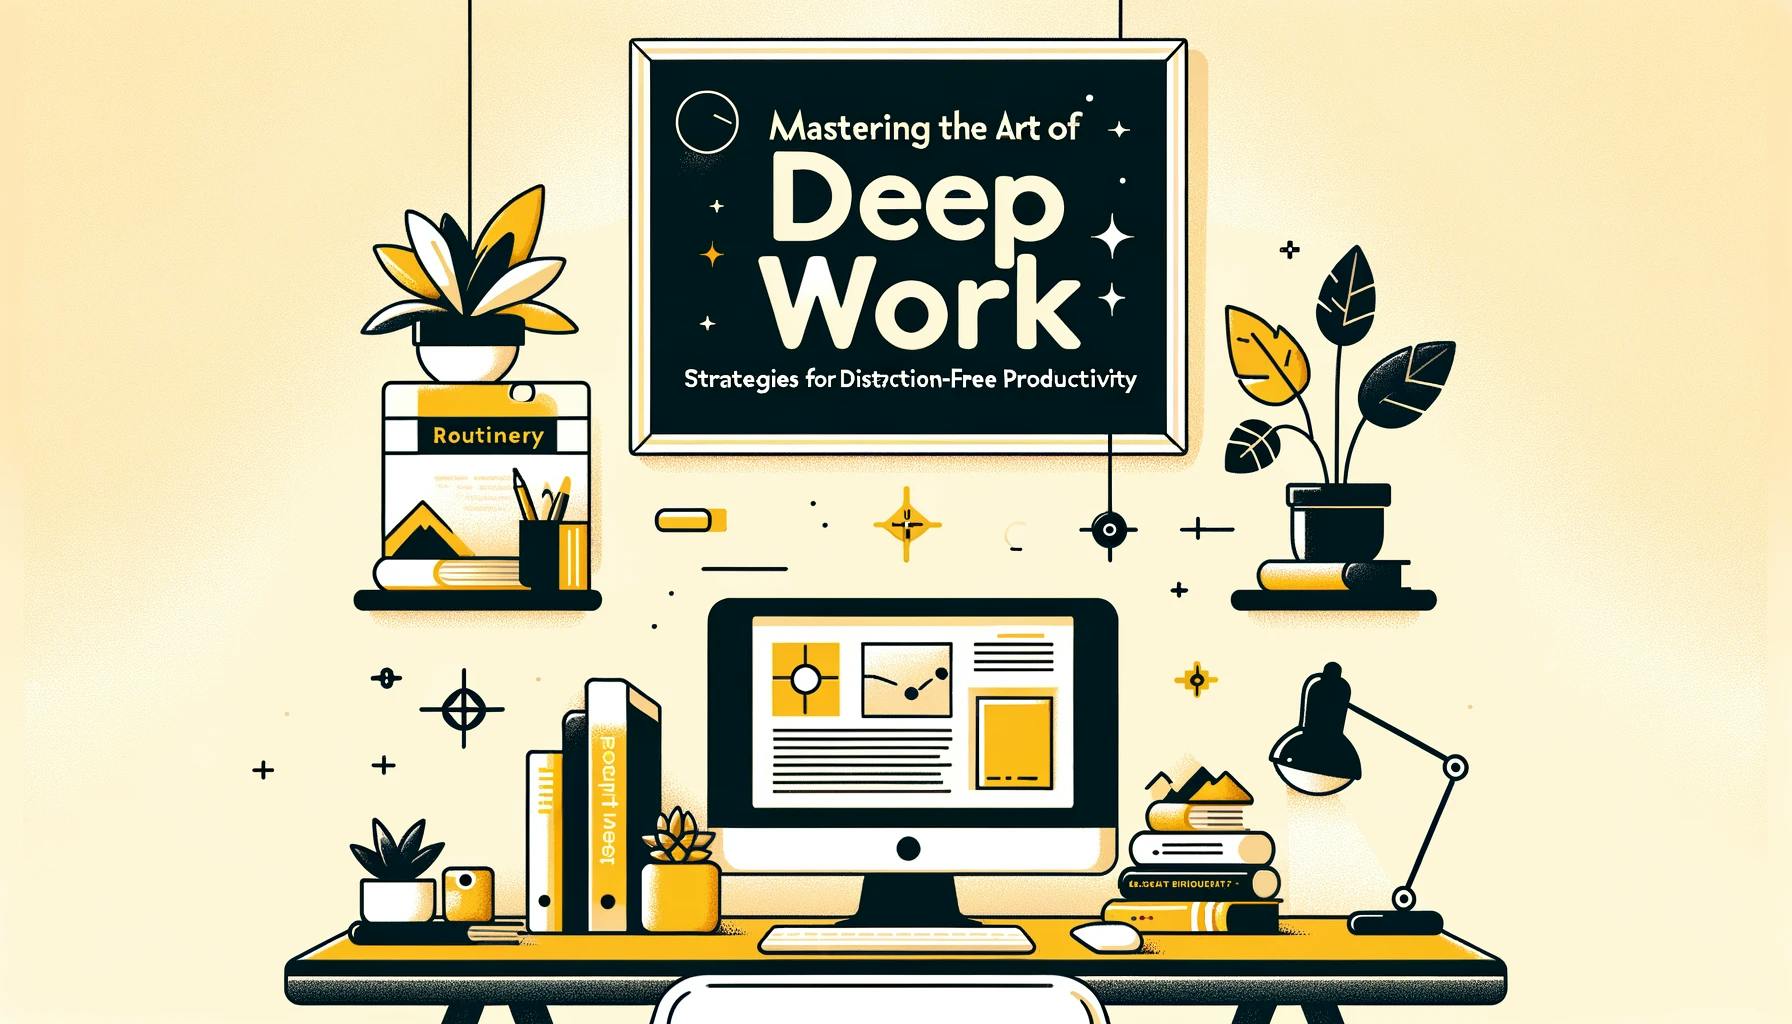 Mastering the Art of Deep Work: Strategies for Distraction-Free Productivity